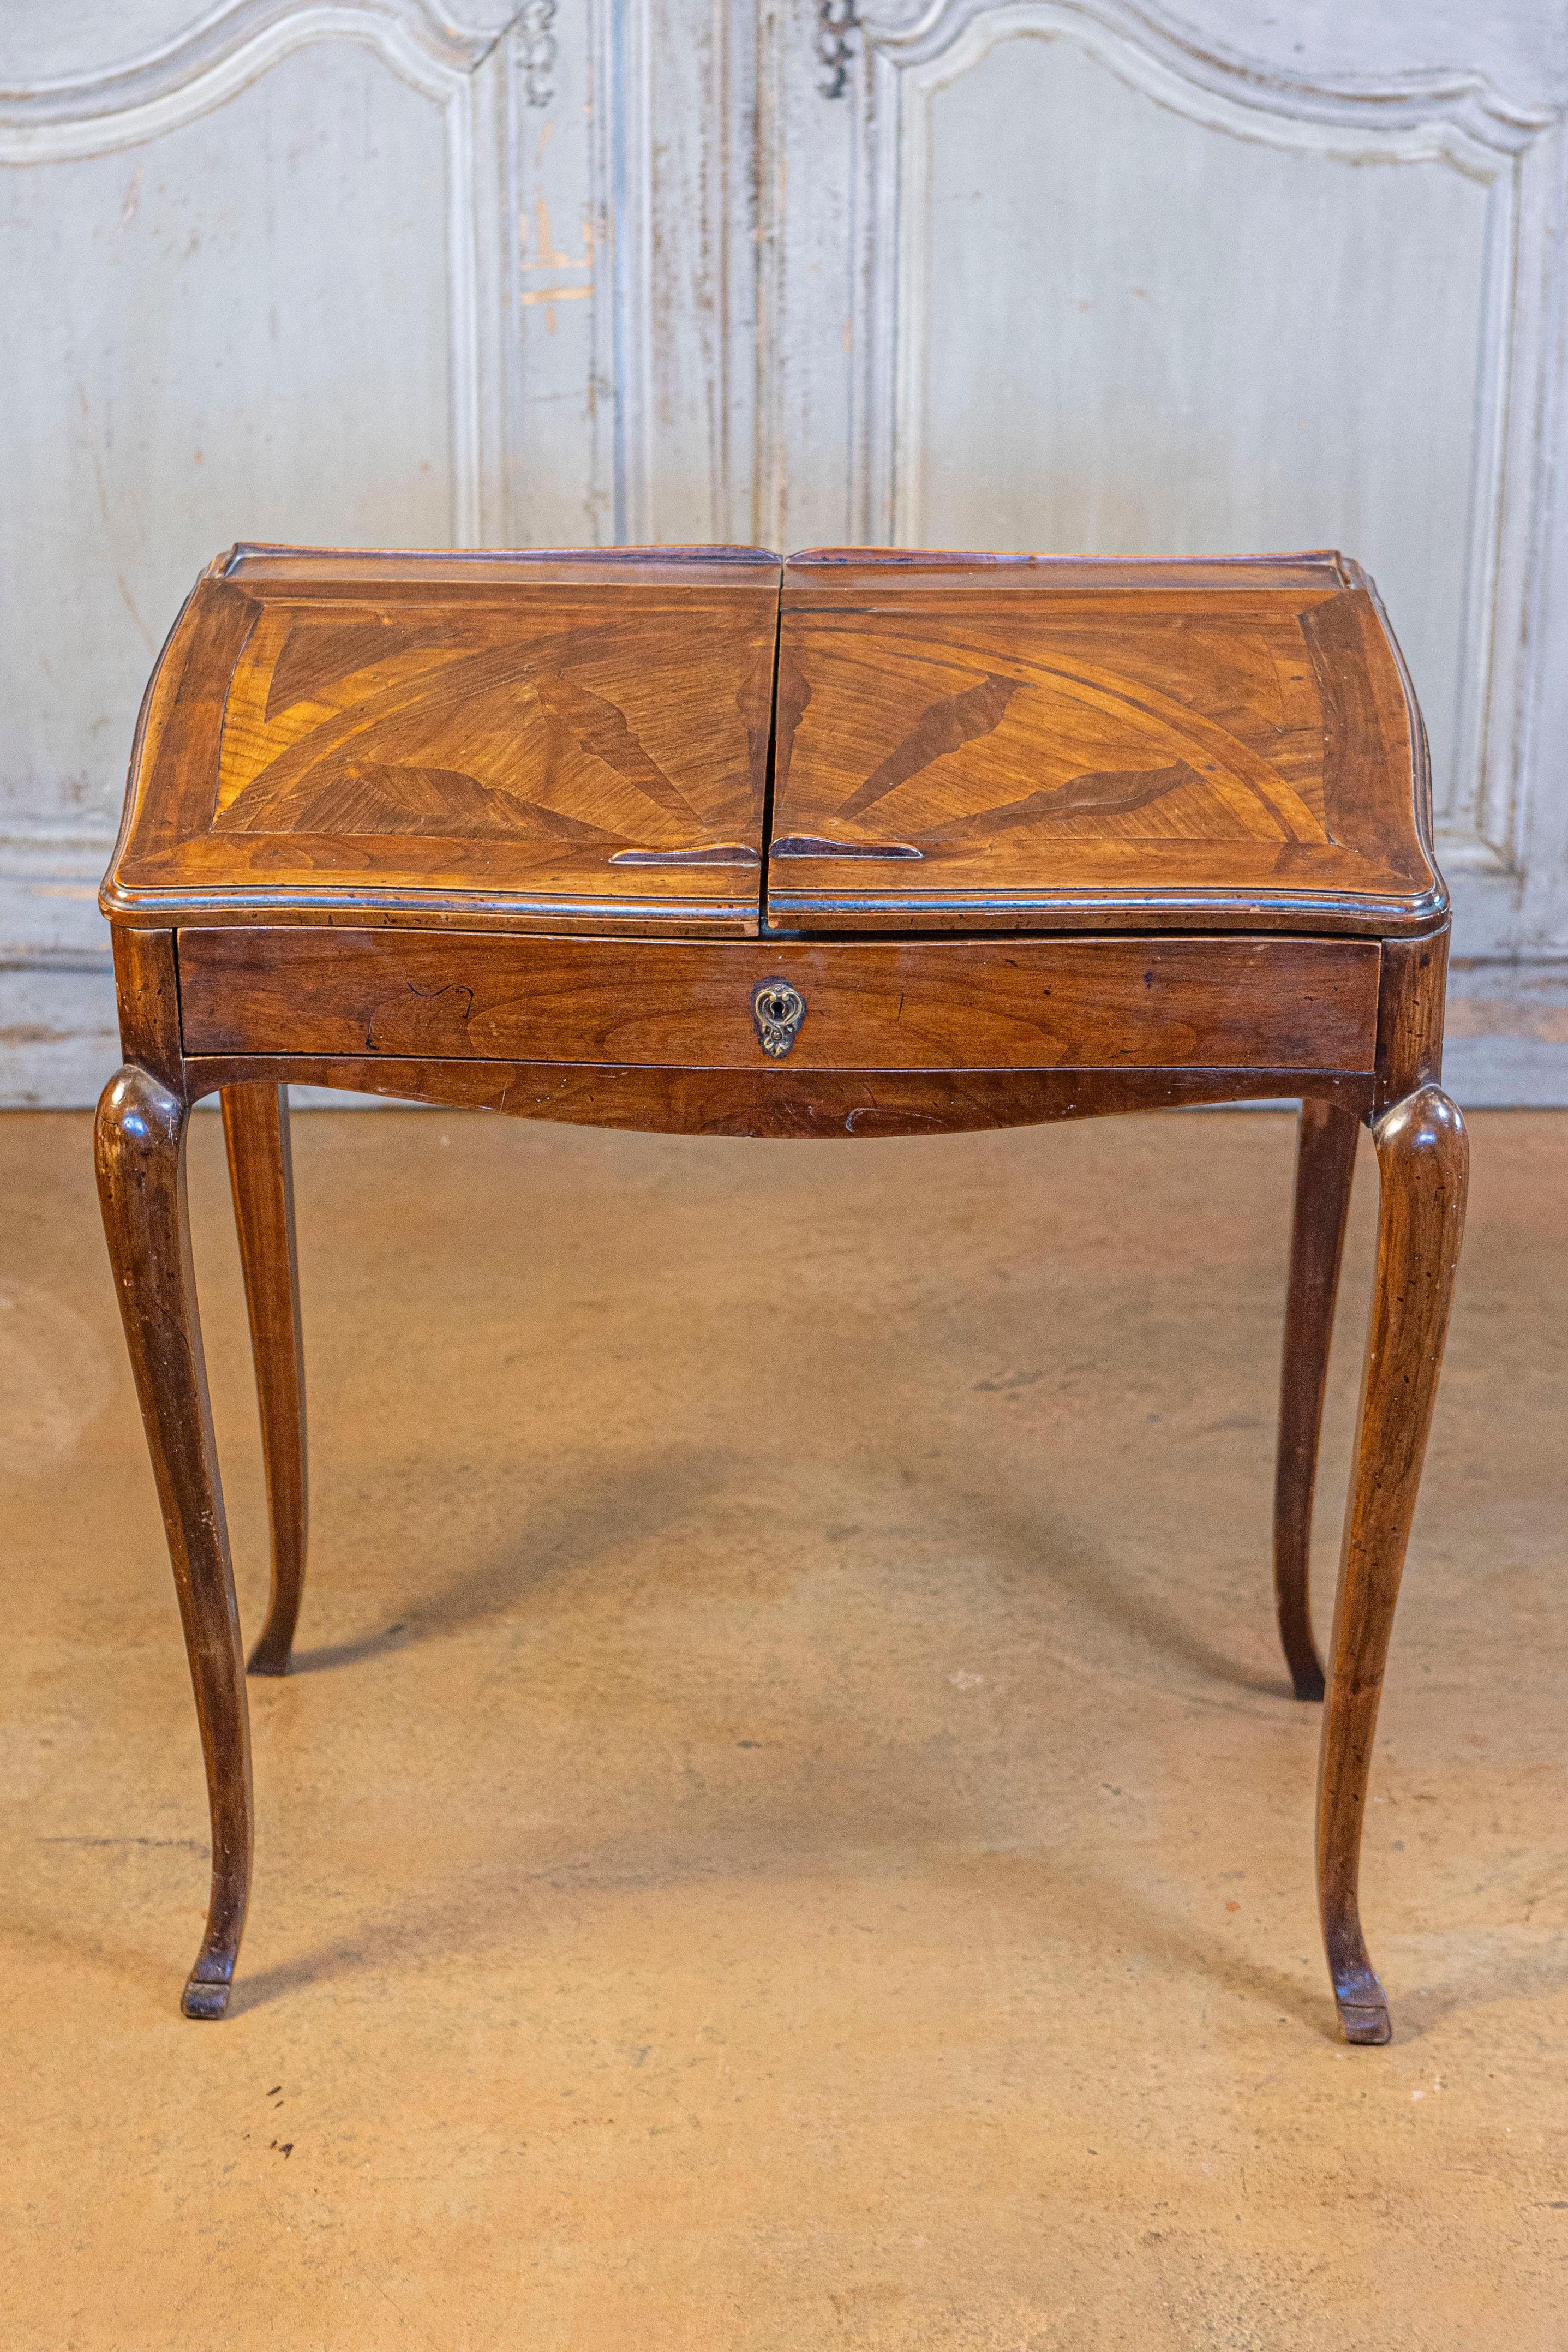 A stamped French Louis XV style small walnut slant-front desk with sliding inlaid panels, long drawer and inner compartments from the early 19th century. This petite French desk was born during the Napoleonic years, yet decorated with the curvy